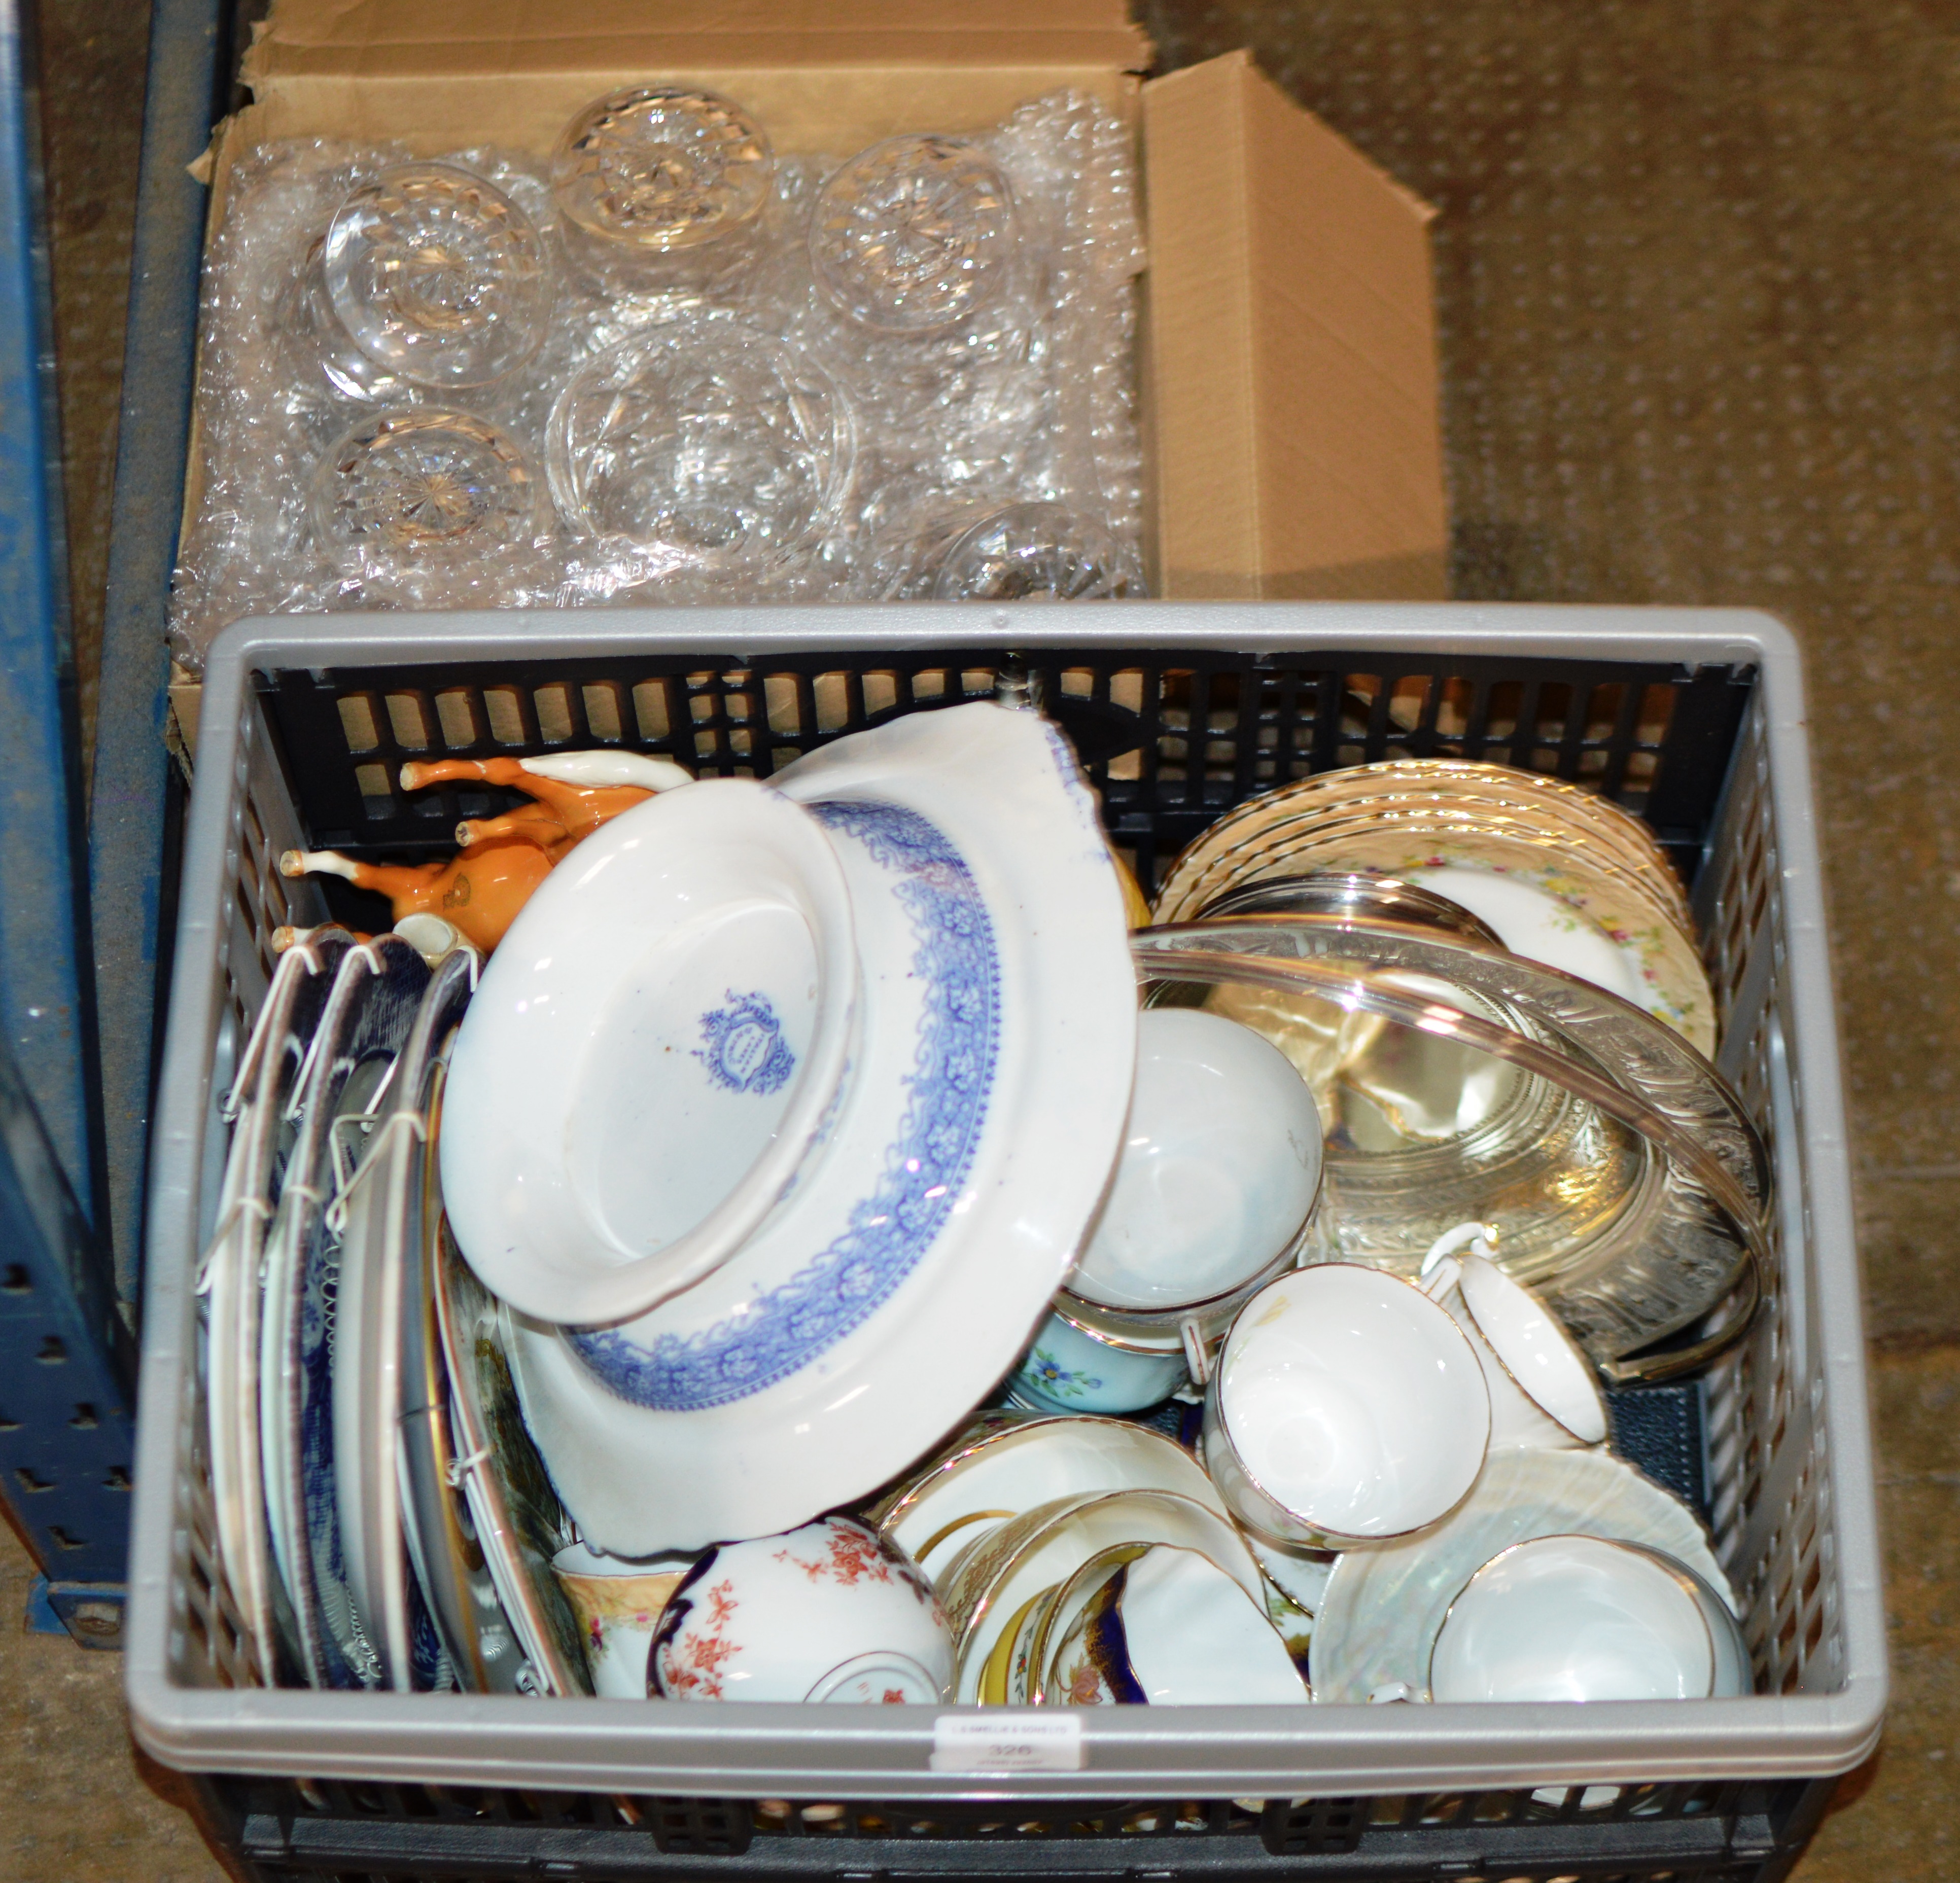 2 BOXES CONTAINING CRYSTAL WARE VARIOUS CUP AND SAUCER SETS, EP BASKET, BESWICK BIRD ORNAMENT, ROYAL